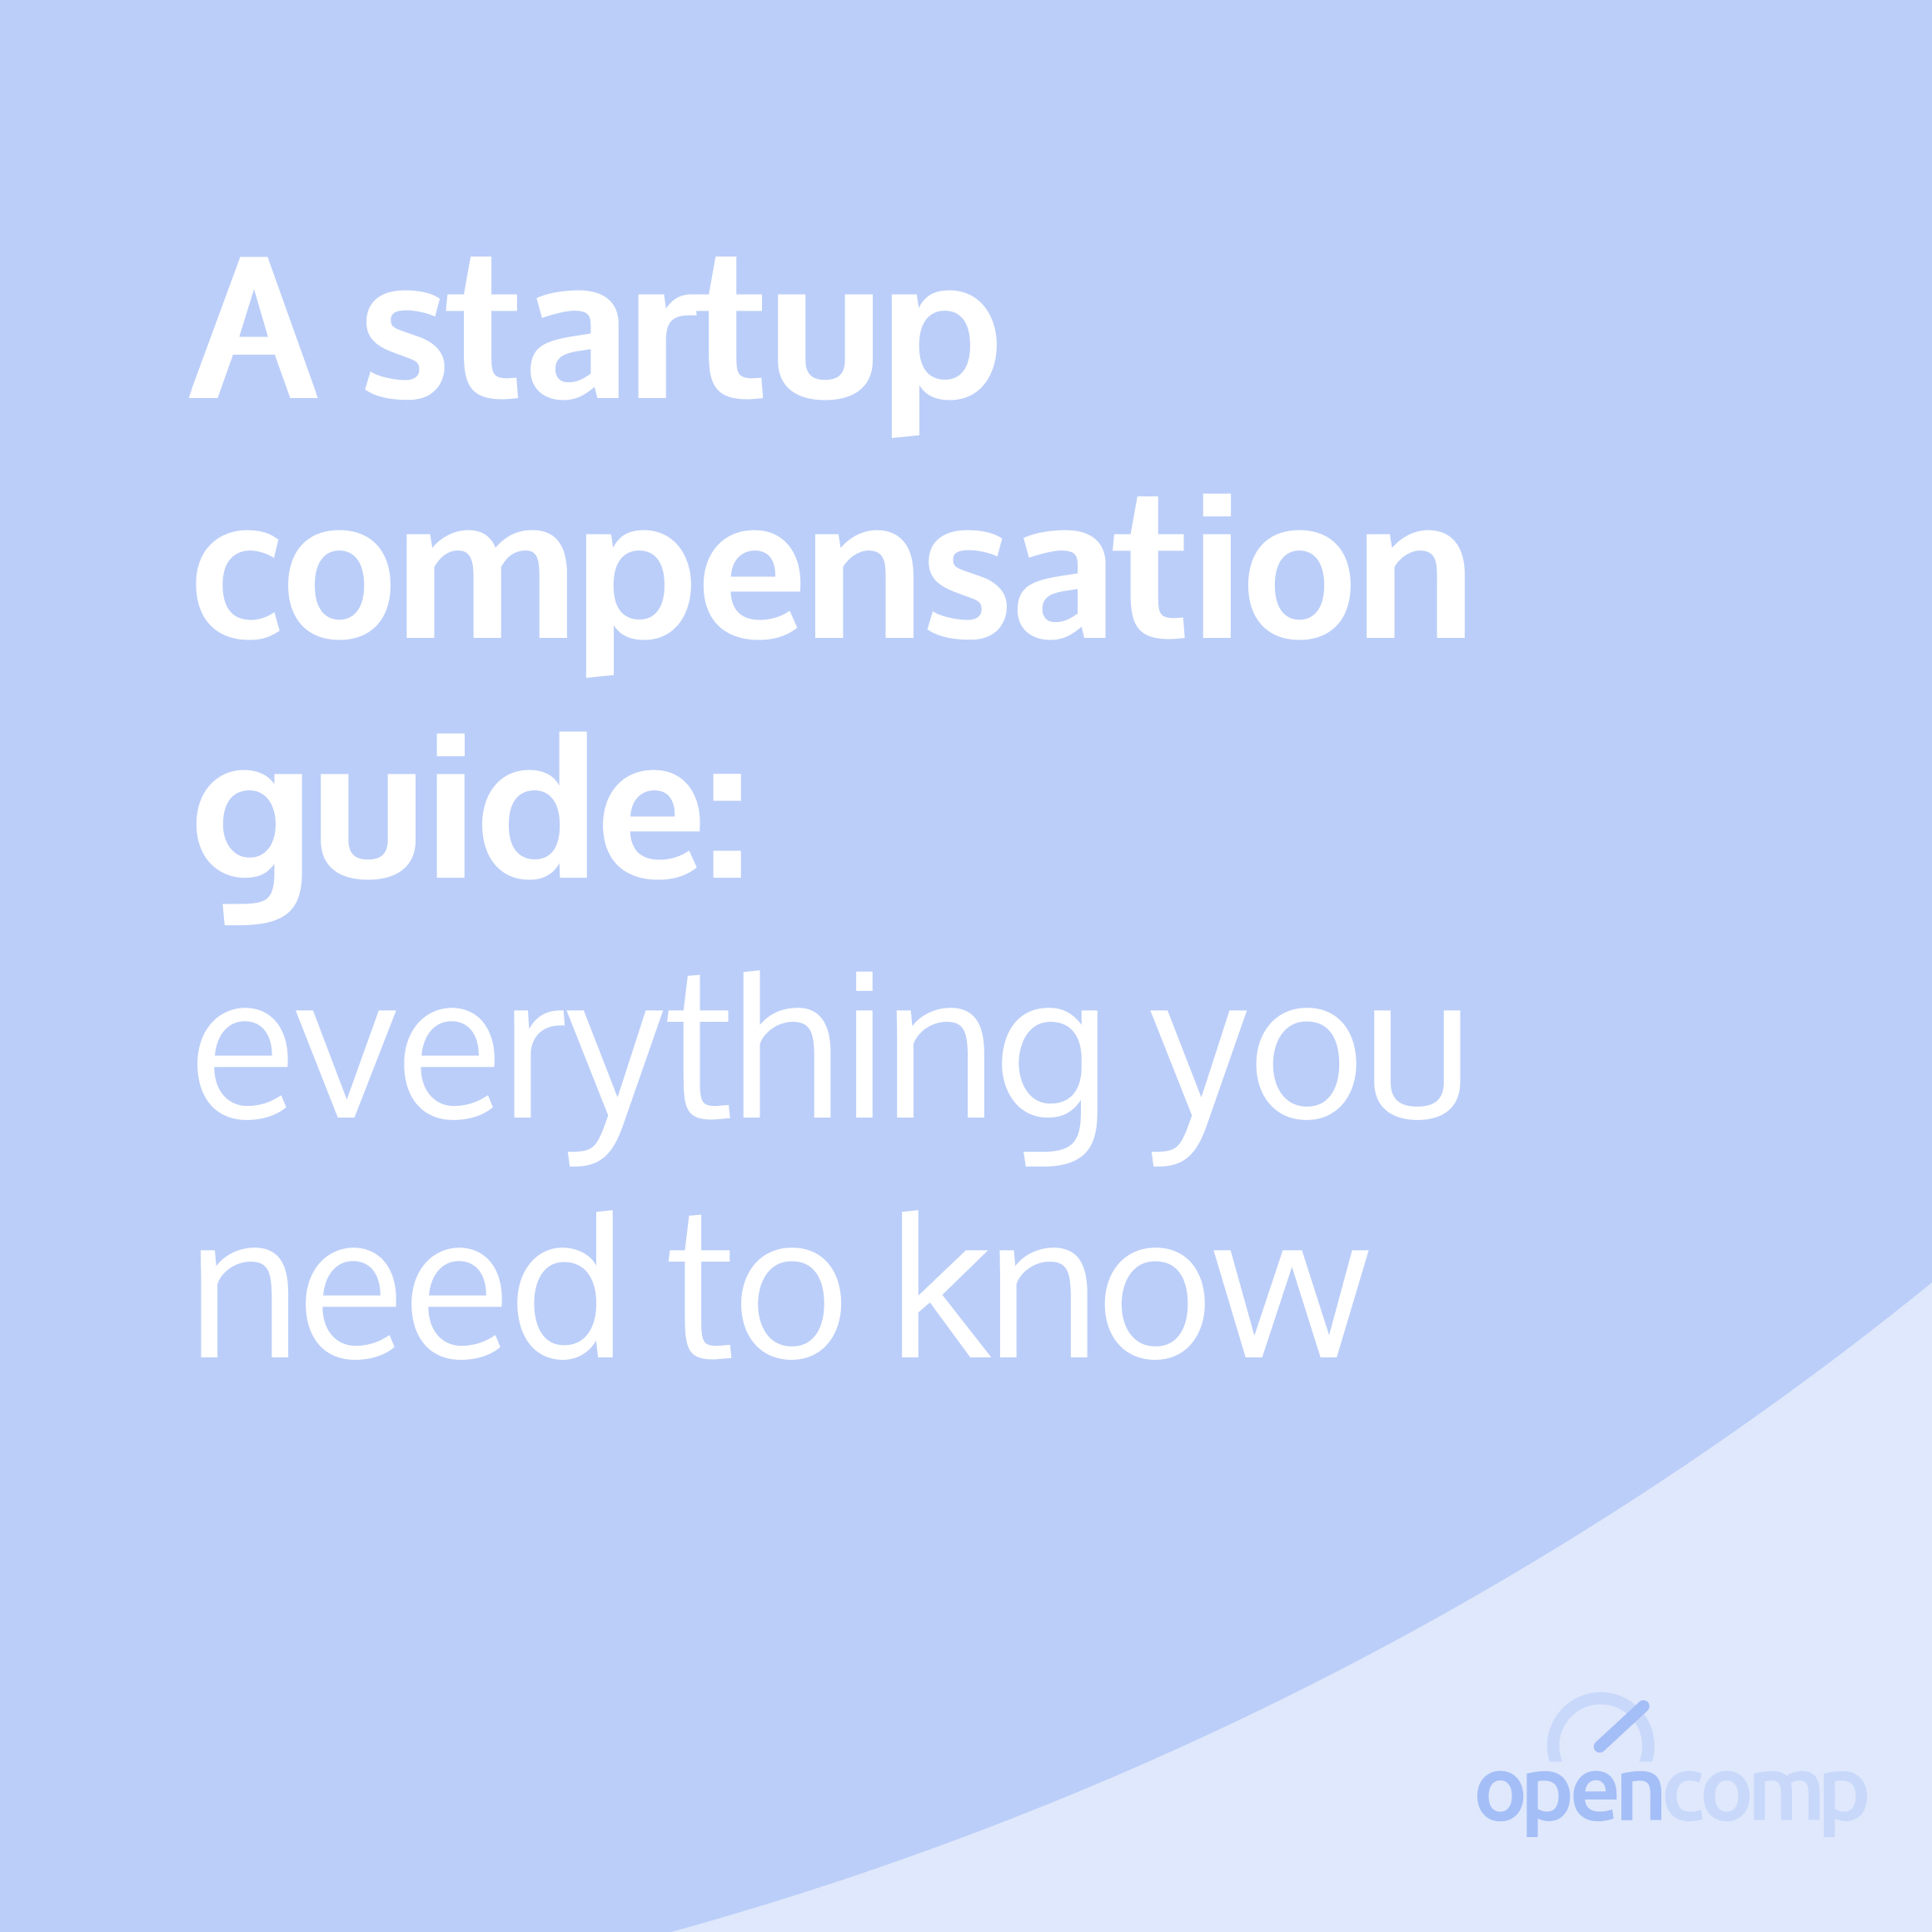 A startup comepensation guide: everything you need to know